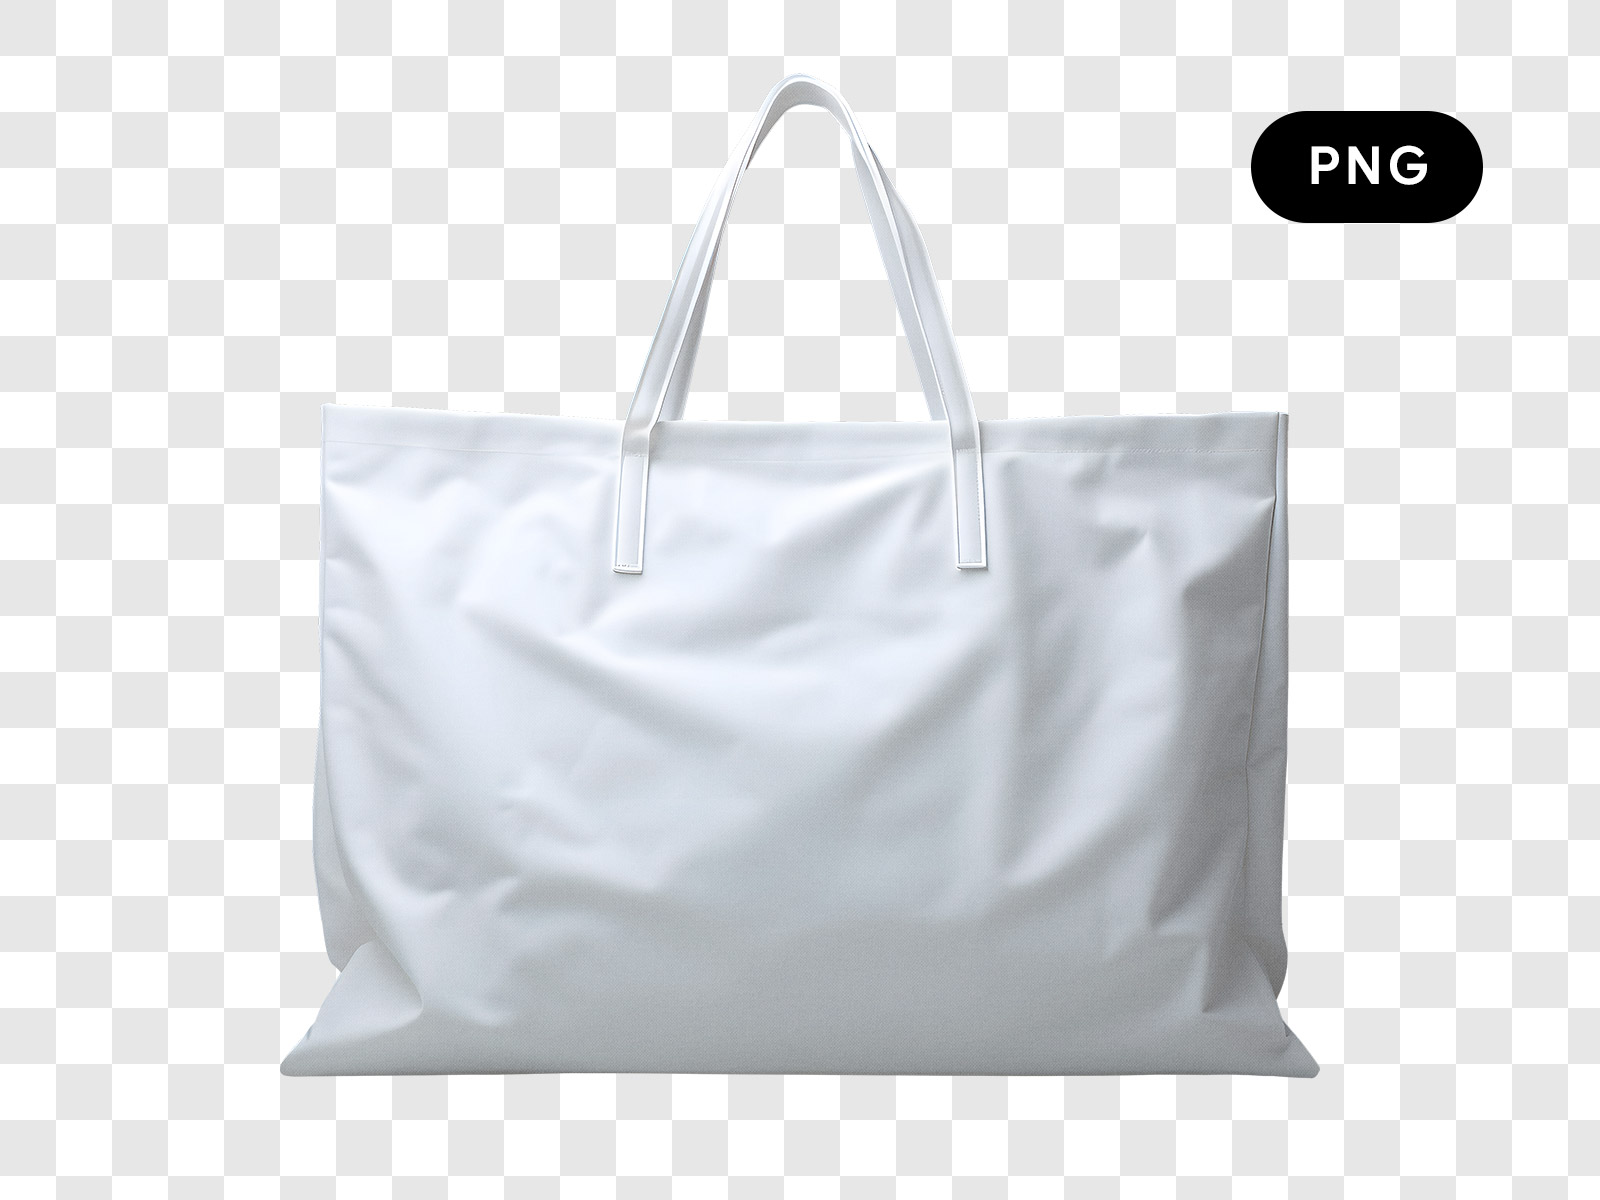 Tote bag Reusable shopping bag Shopping Bags & Trolleys Reuse, royal blue  plastic bags, white, luggage Bags png | PNGEgg